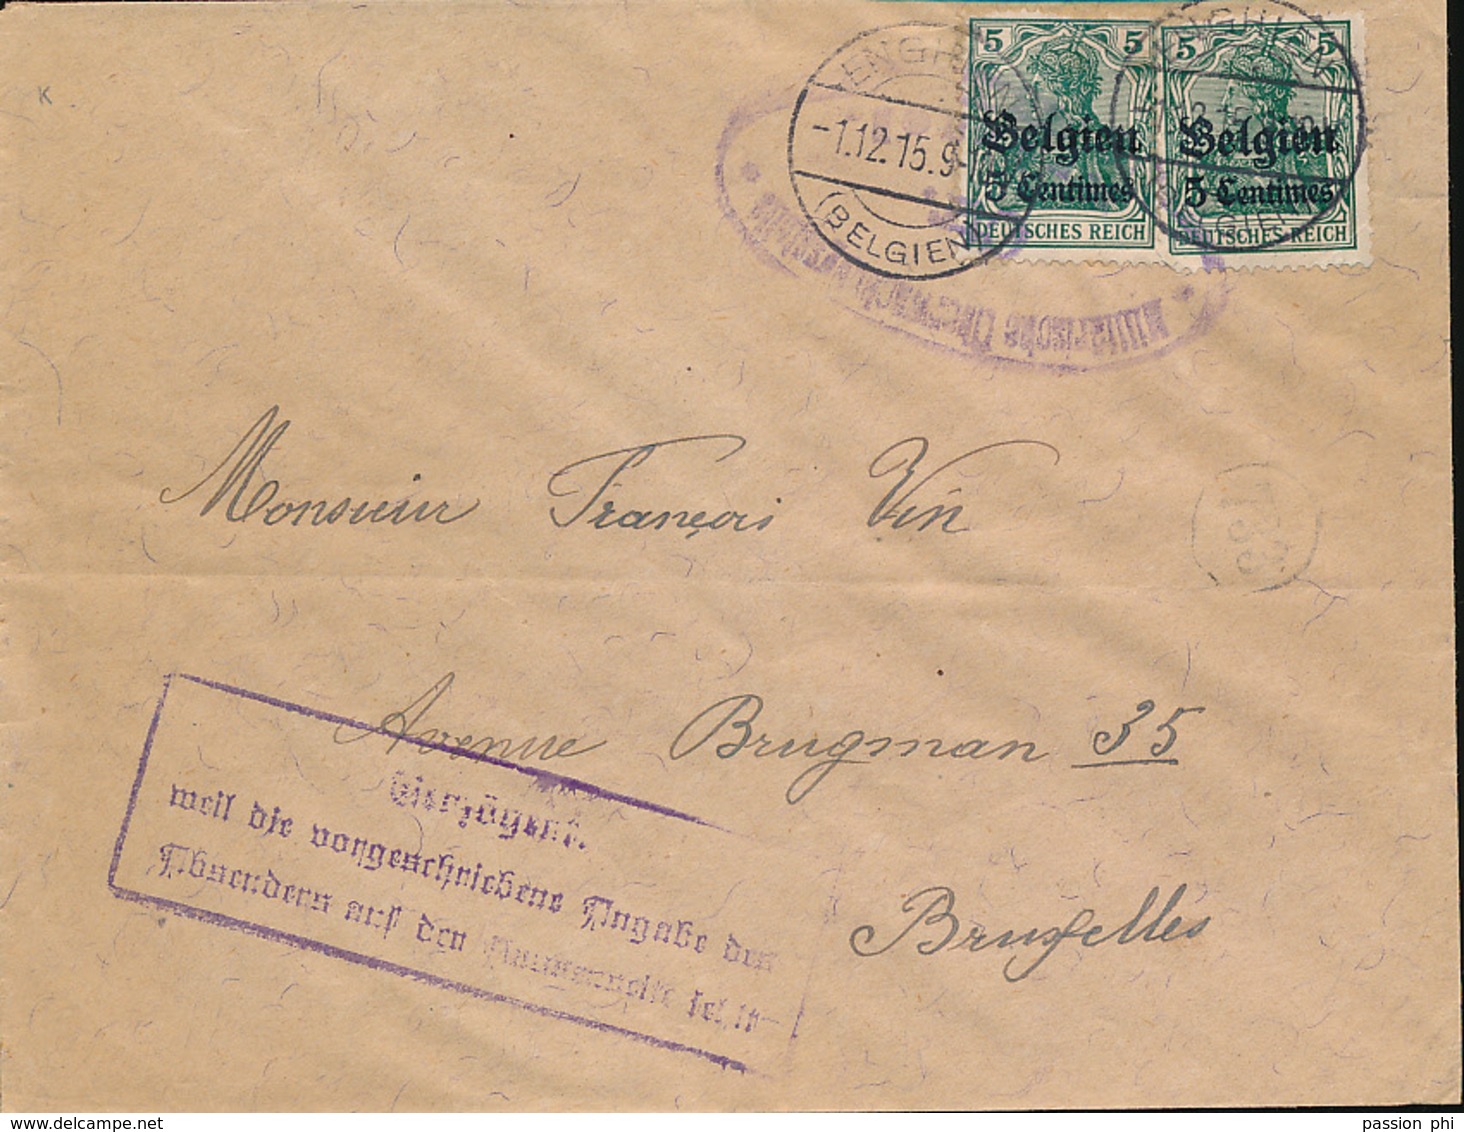 BELGIUM  WW1 COVER FROM ENGHIEN TO BRUSSELS - OC1/25 General Government